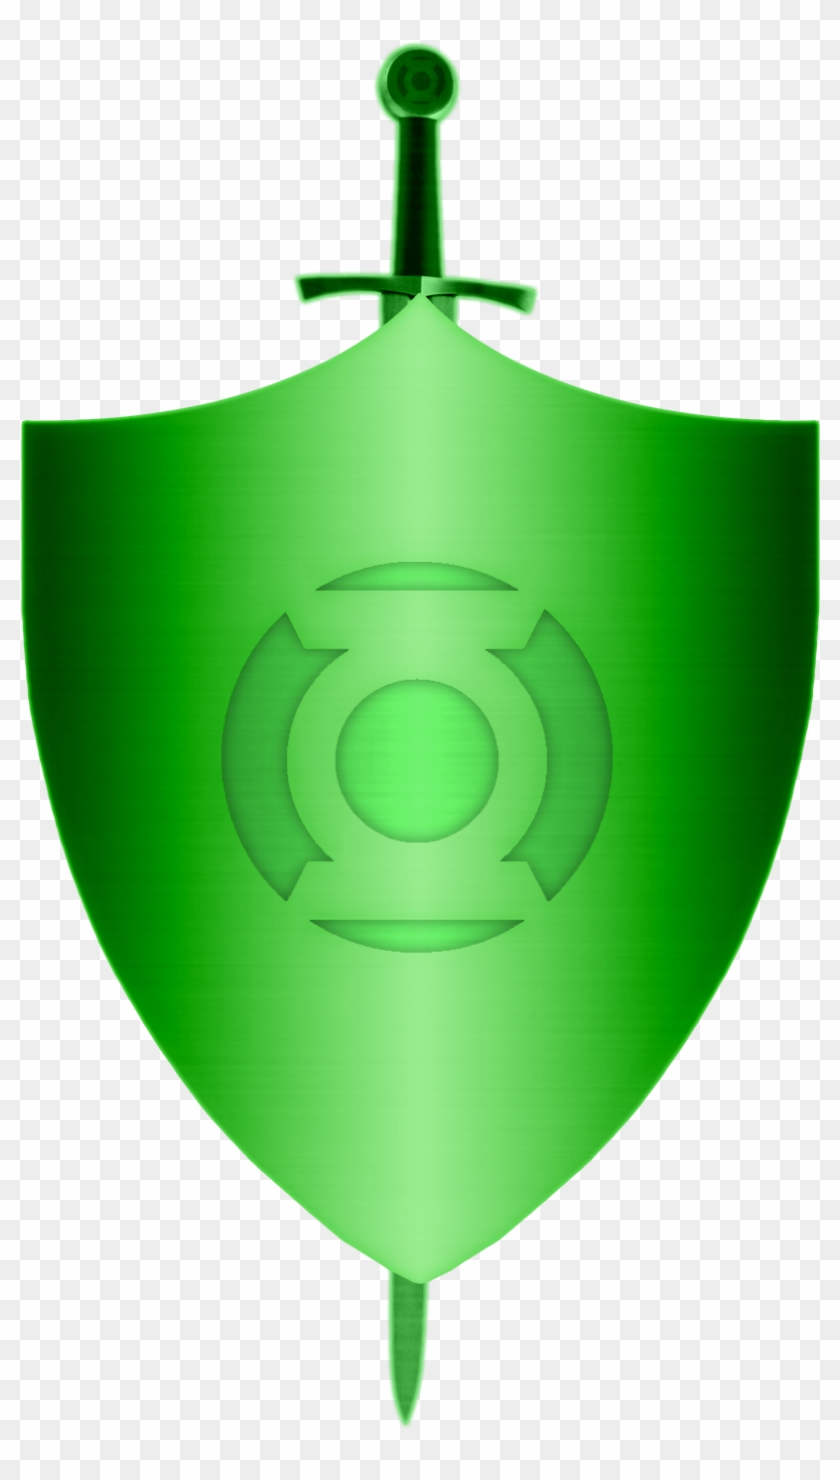 Green Lantern Corps Shield And Sword Construct By Kalel7 - Green Shield With Sword #660481